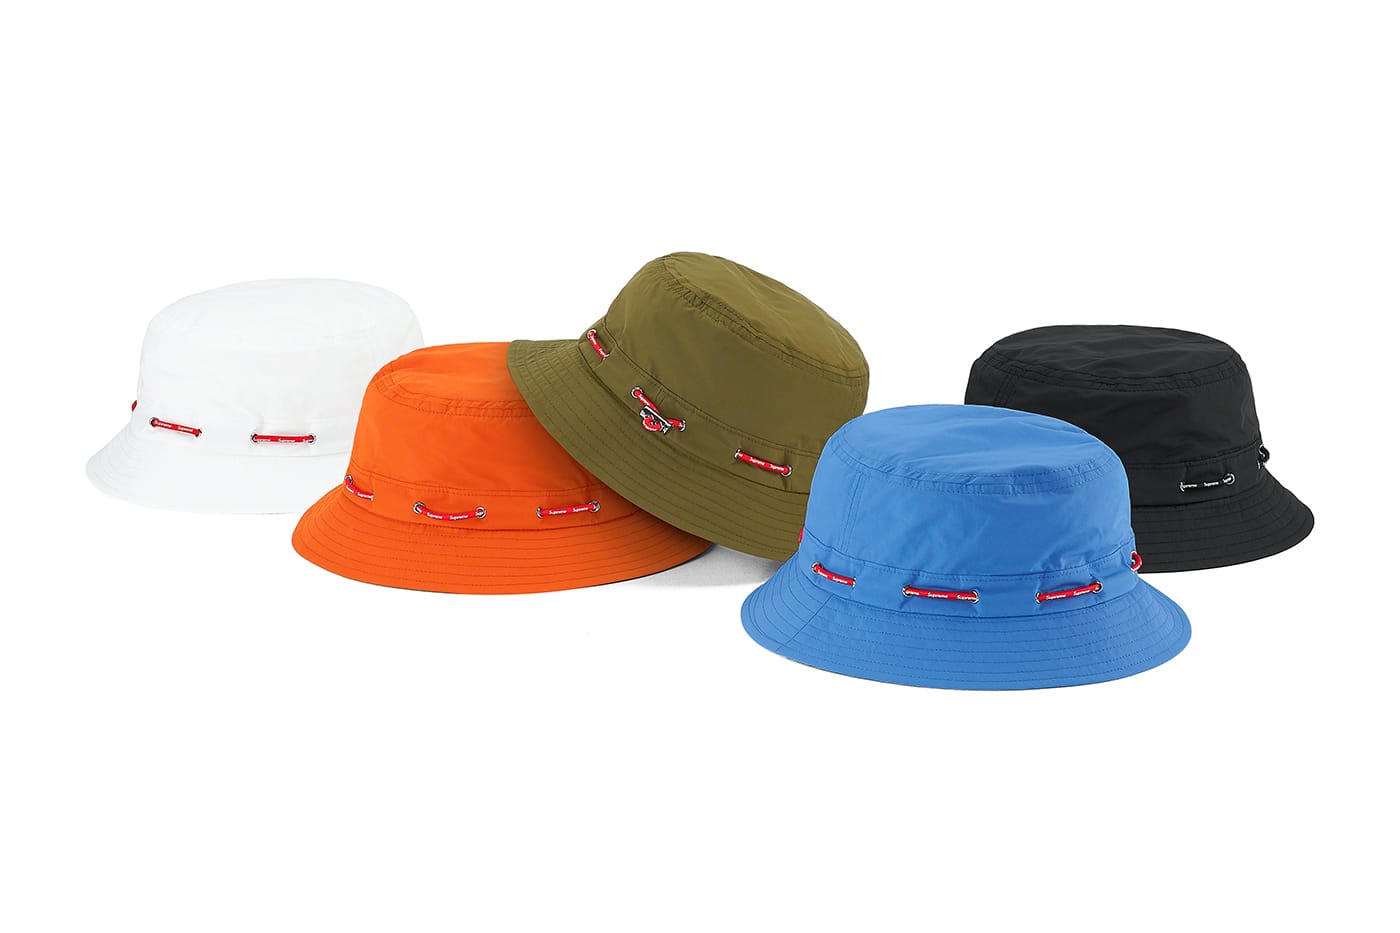 Supreme Fall/Winter 2020 Hats and Caps | Hypebeast